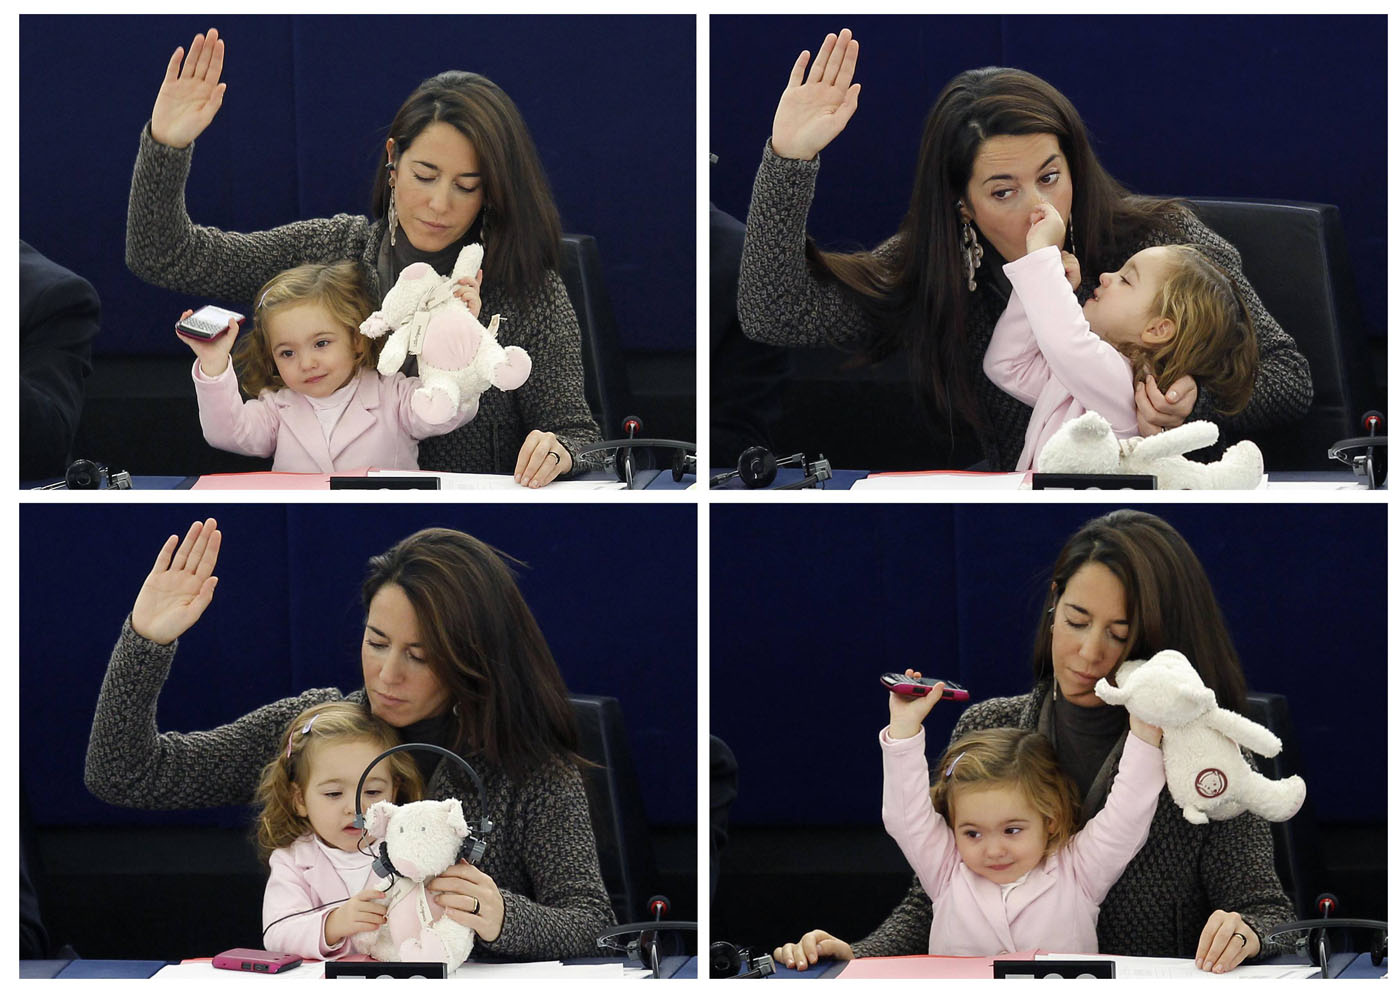 A combination picture shows Italy’s Member of the European Parliament Licia Ronzulli taking p...